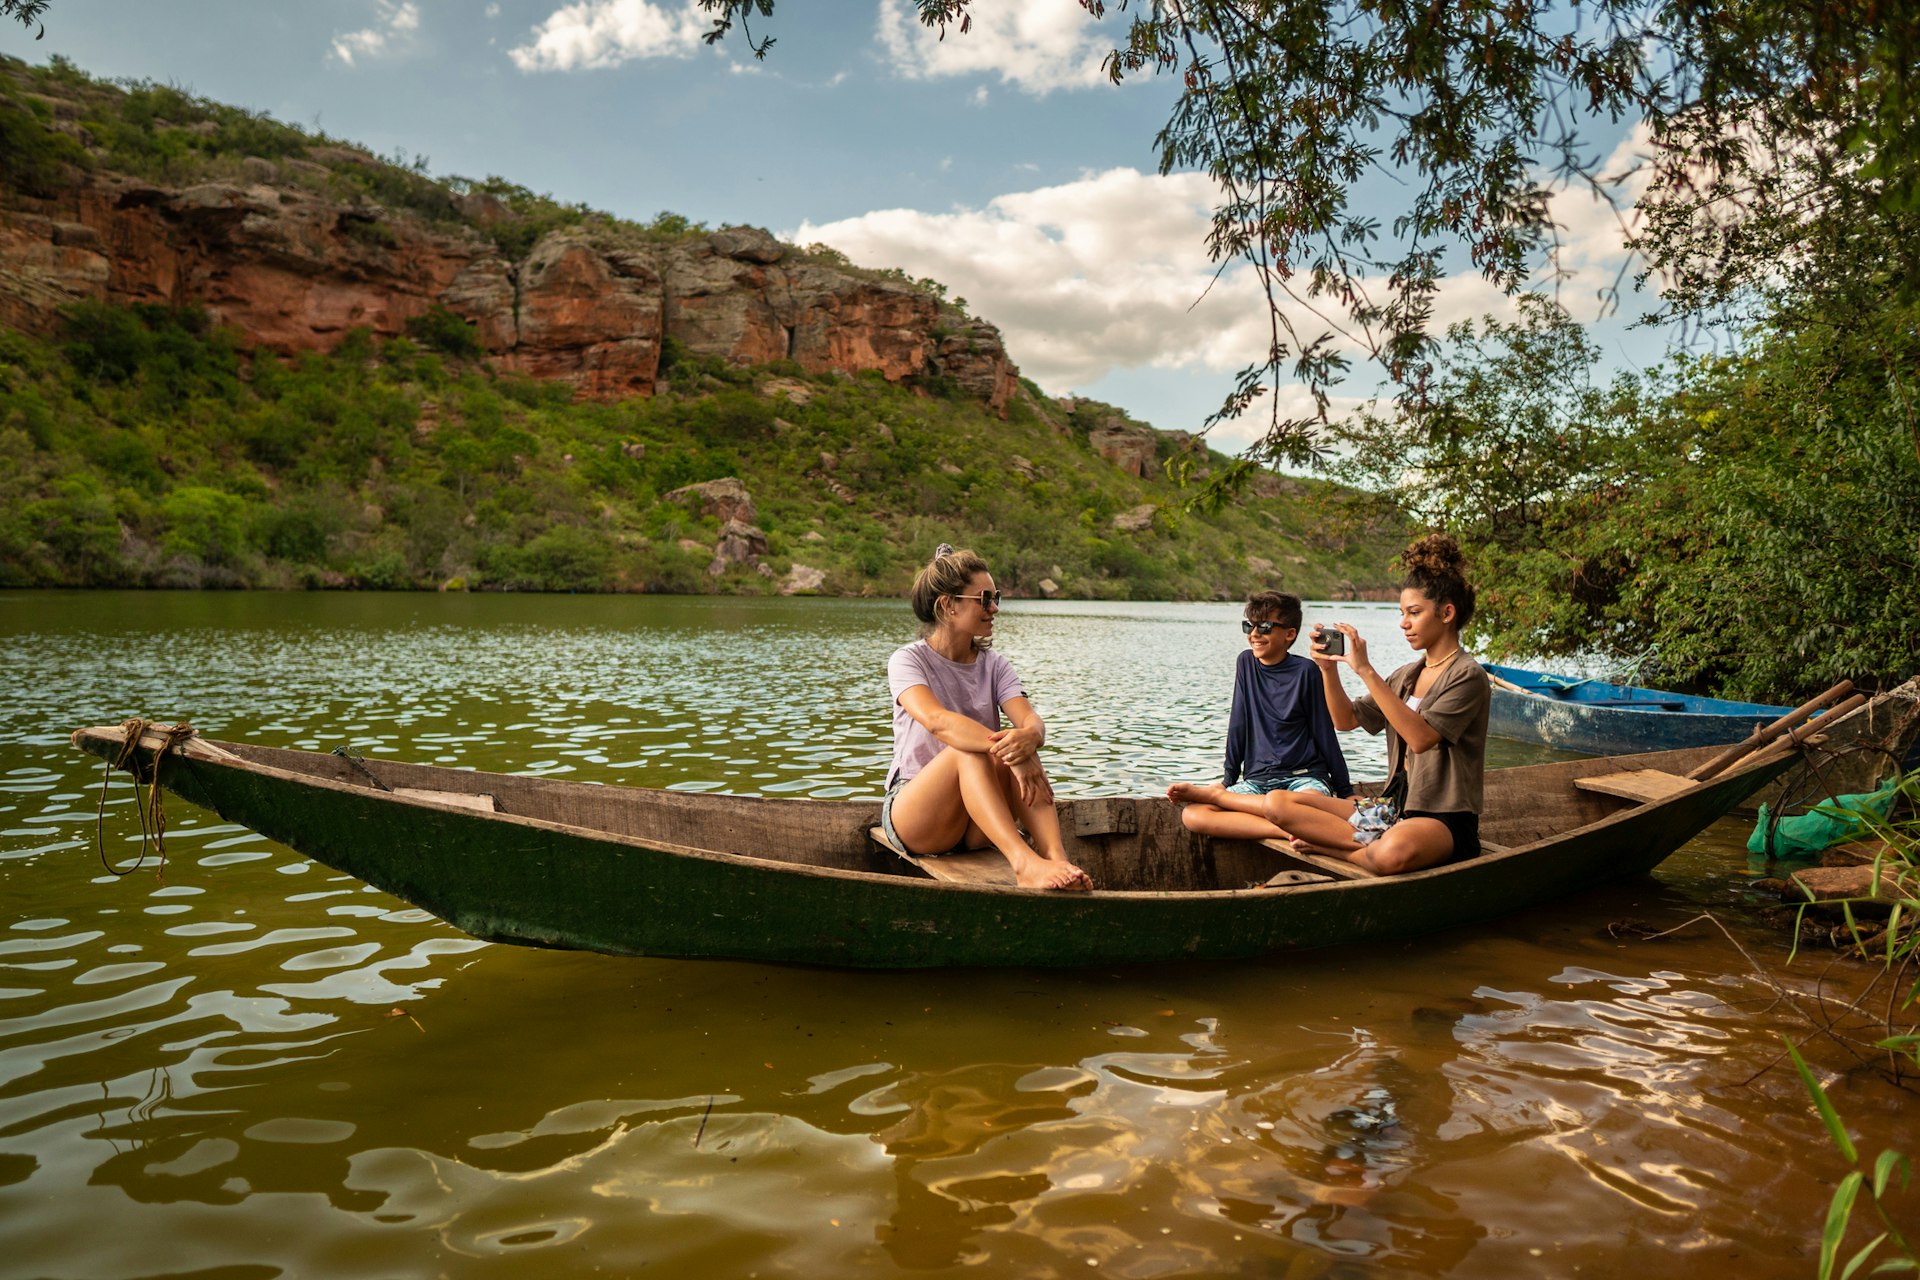 Three young teens take photos from a small canoe out on a river